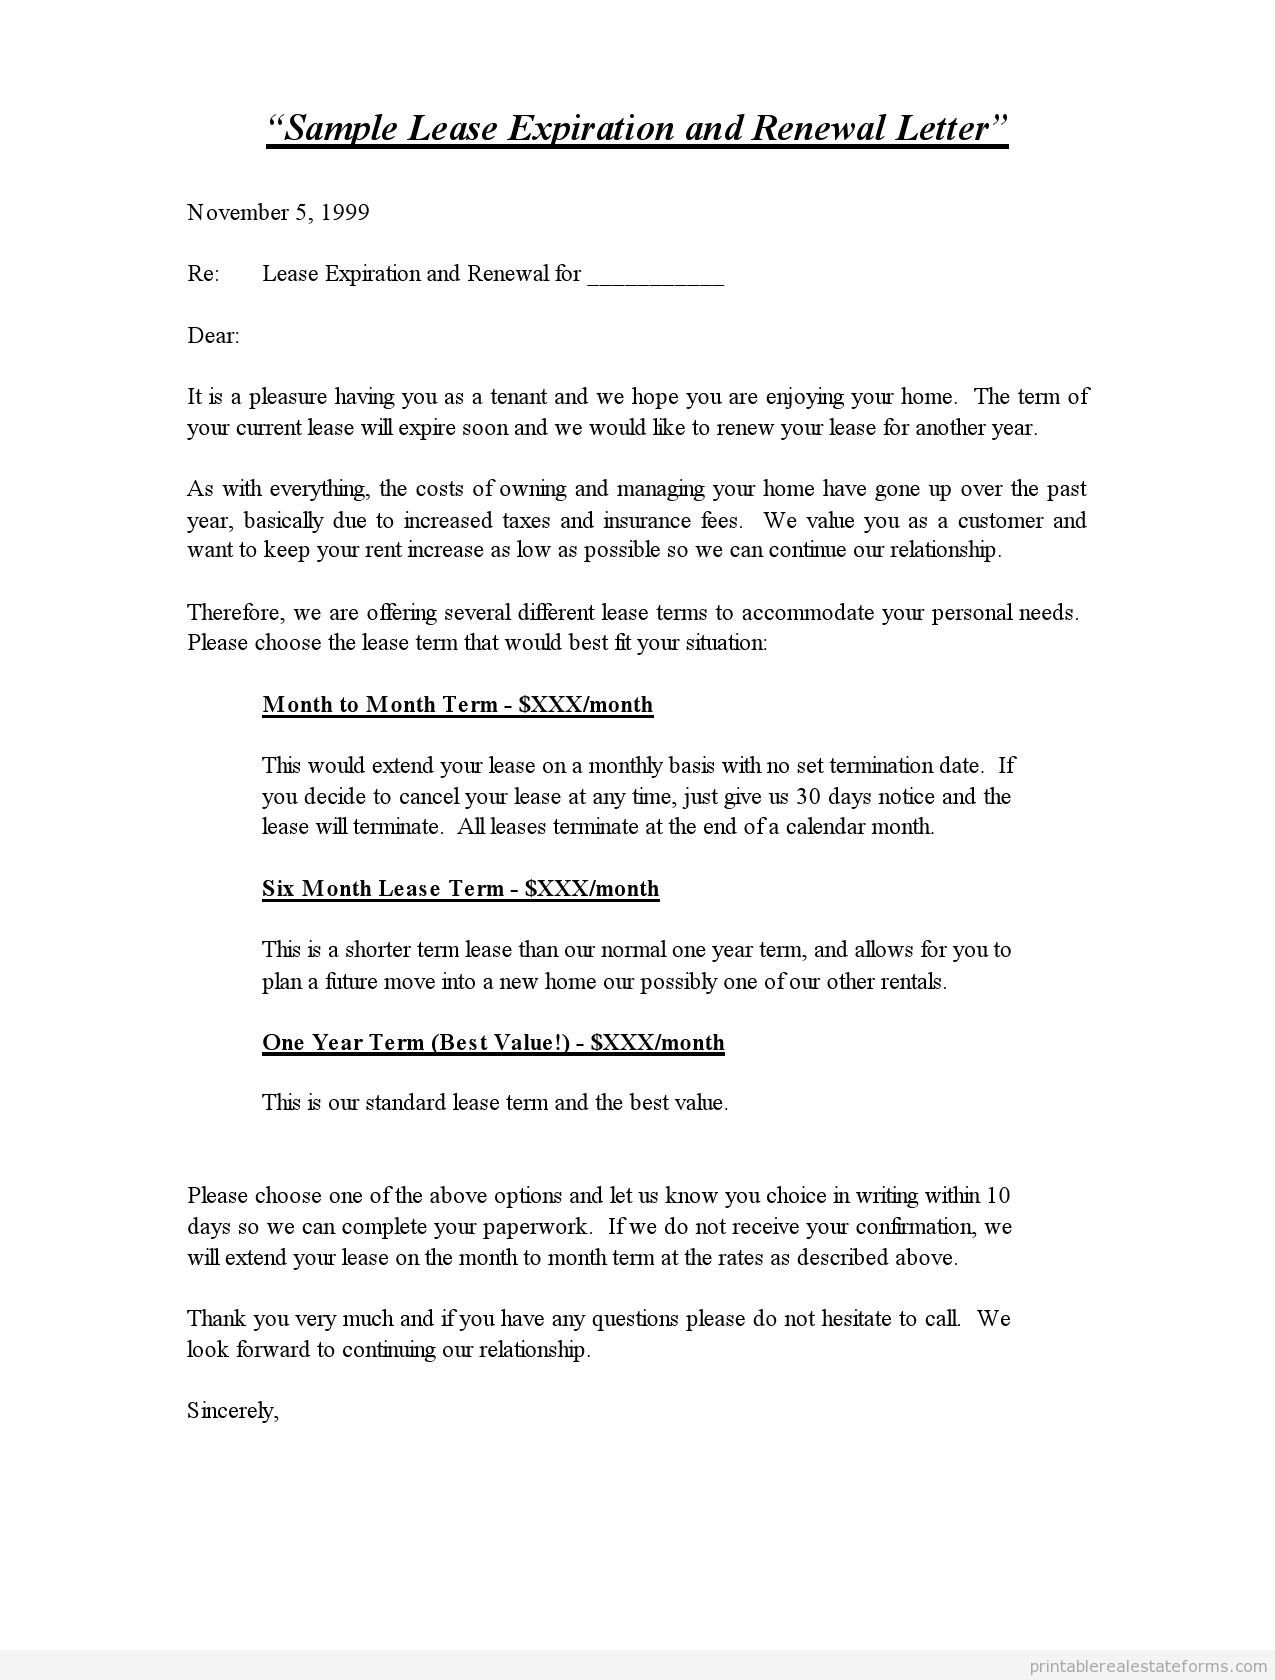 Sample Lease Expiration and Renewal Letter - Standard0001